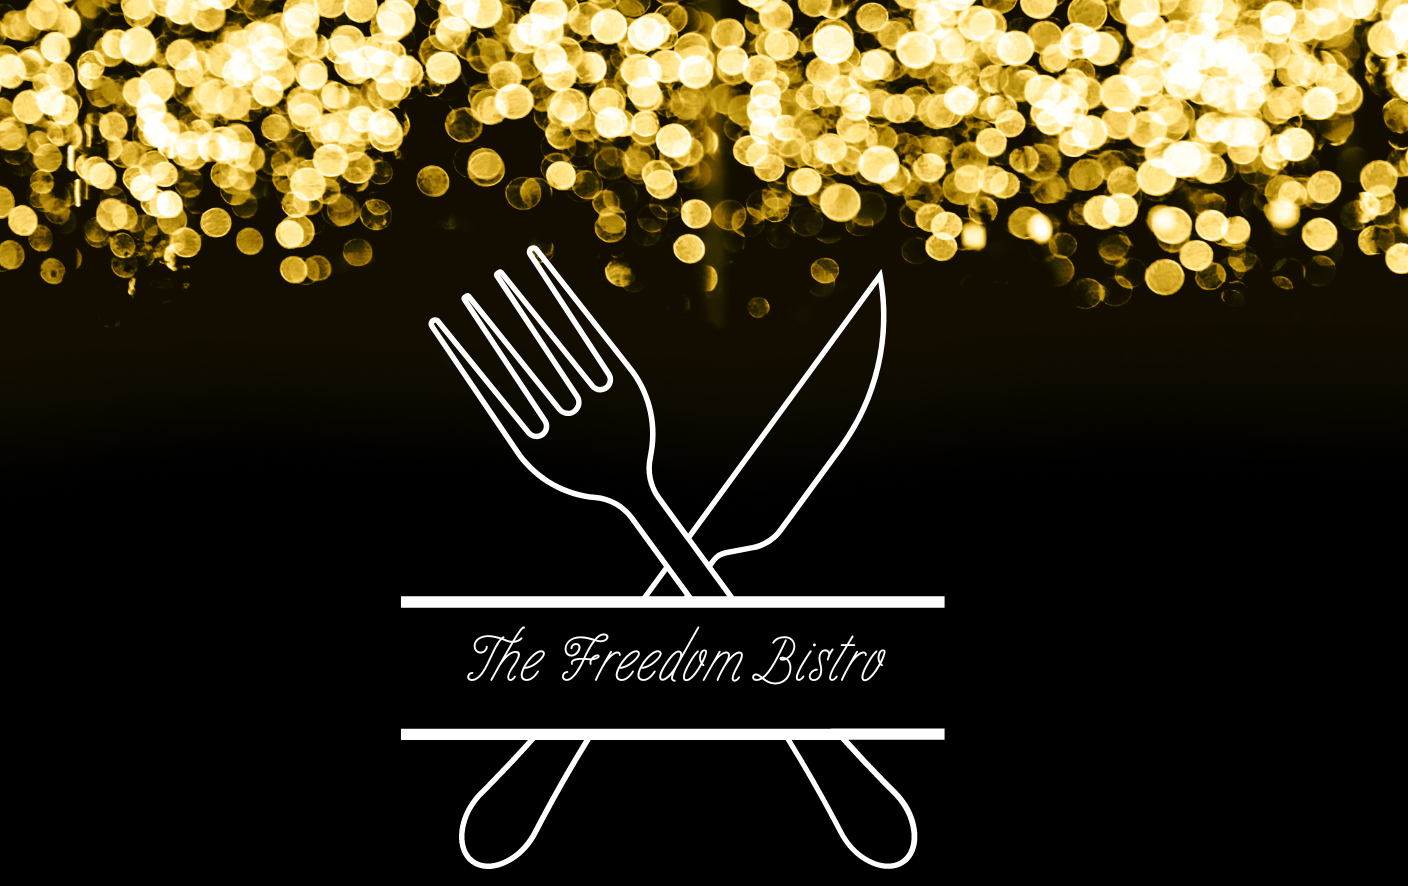 black background with gold dots and an image of a fork and knife crossed over each other with text the freedom bistro